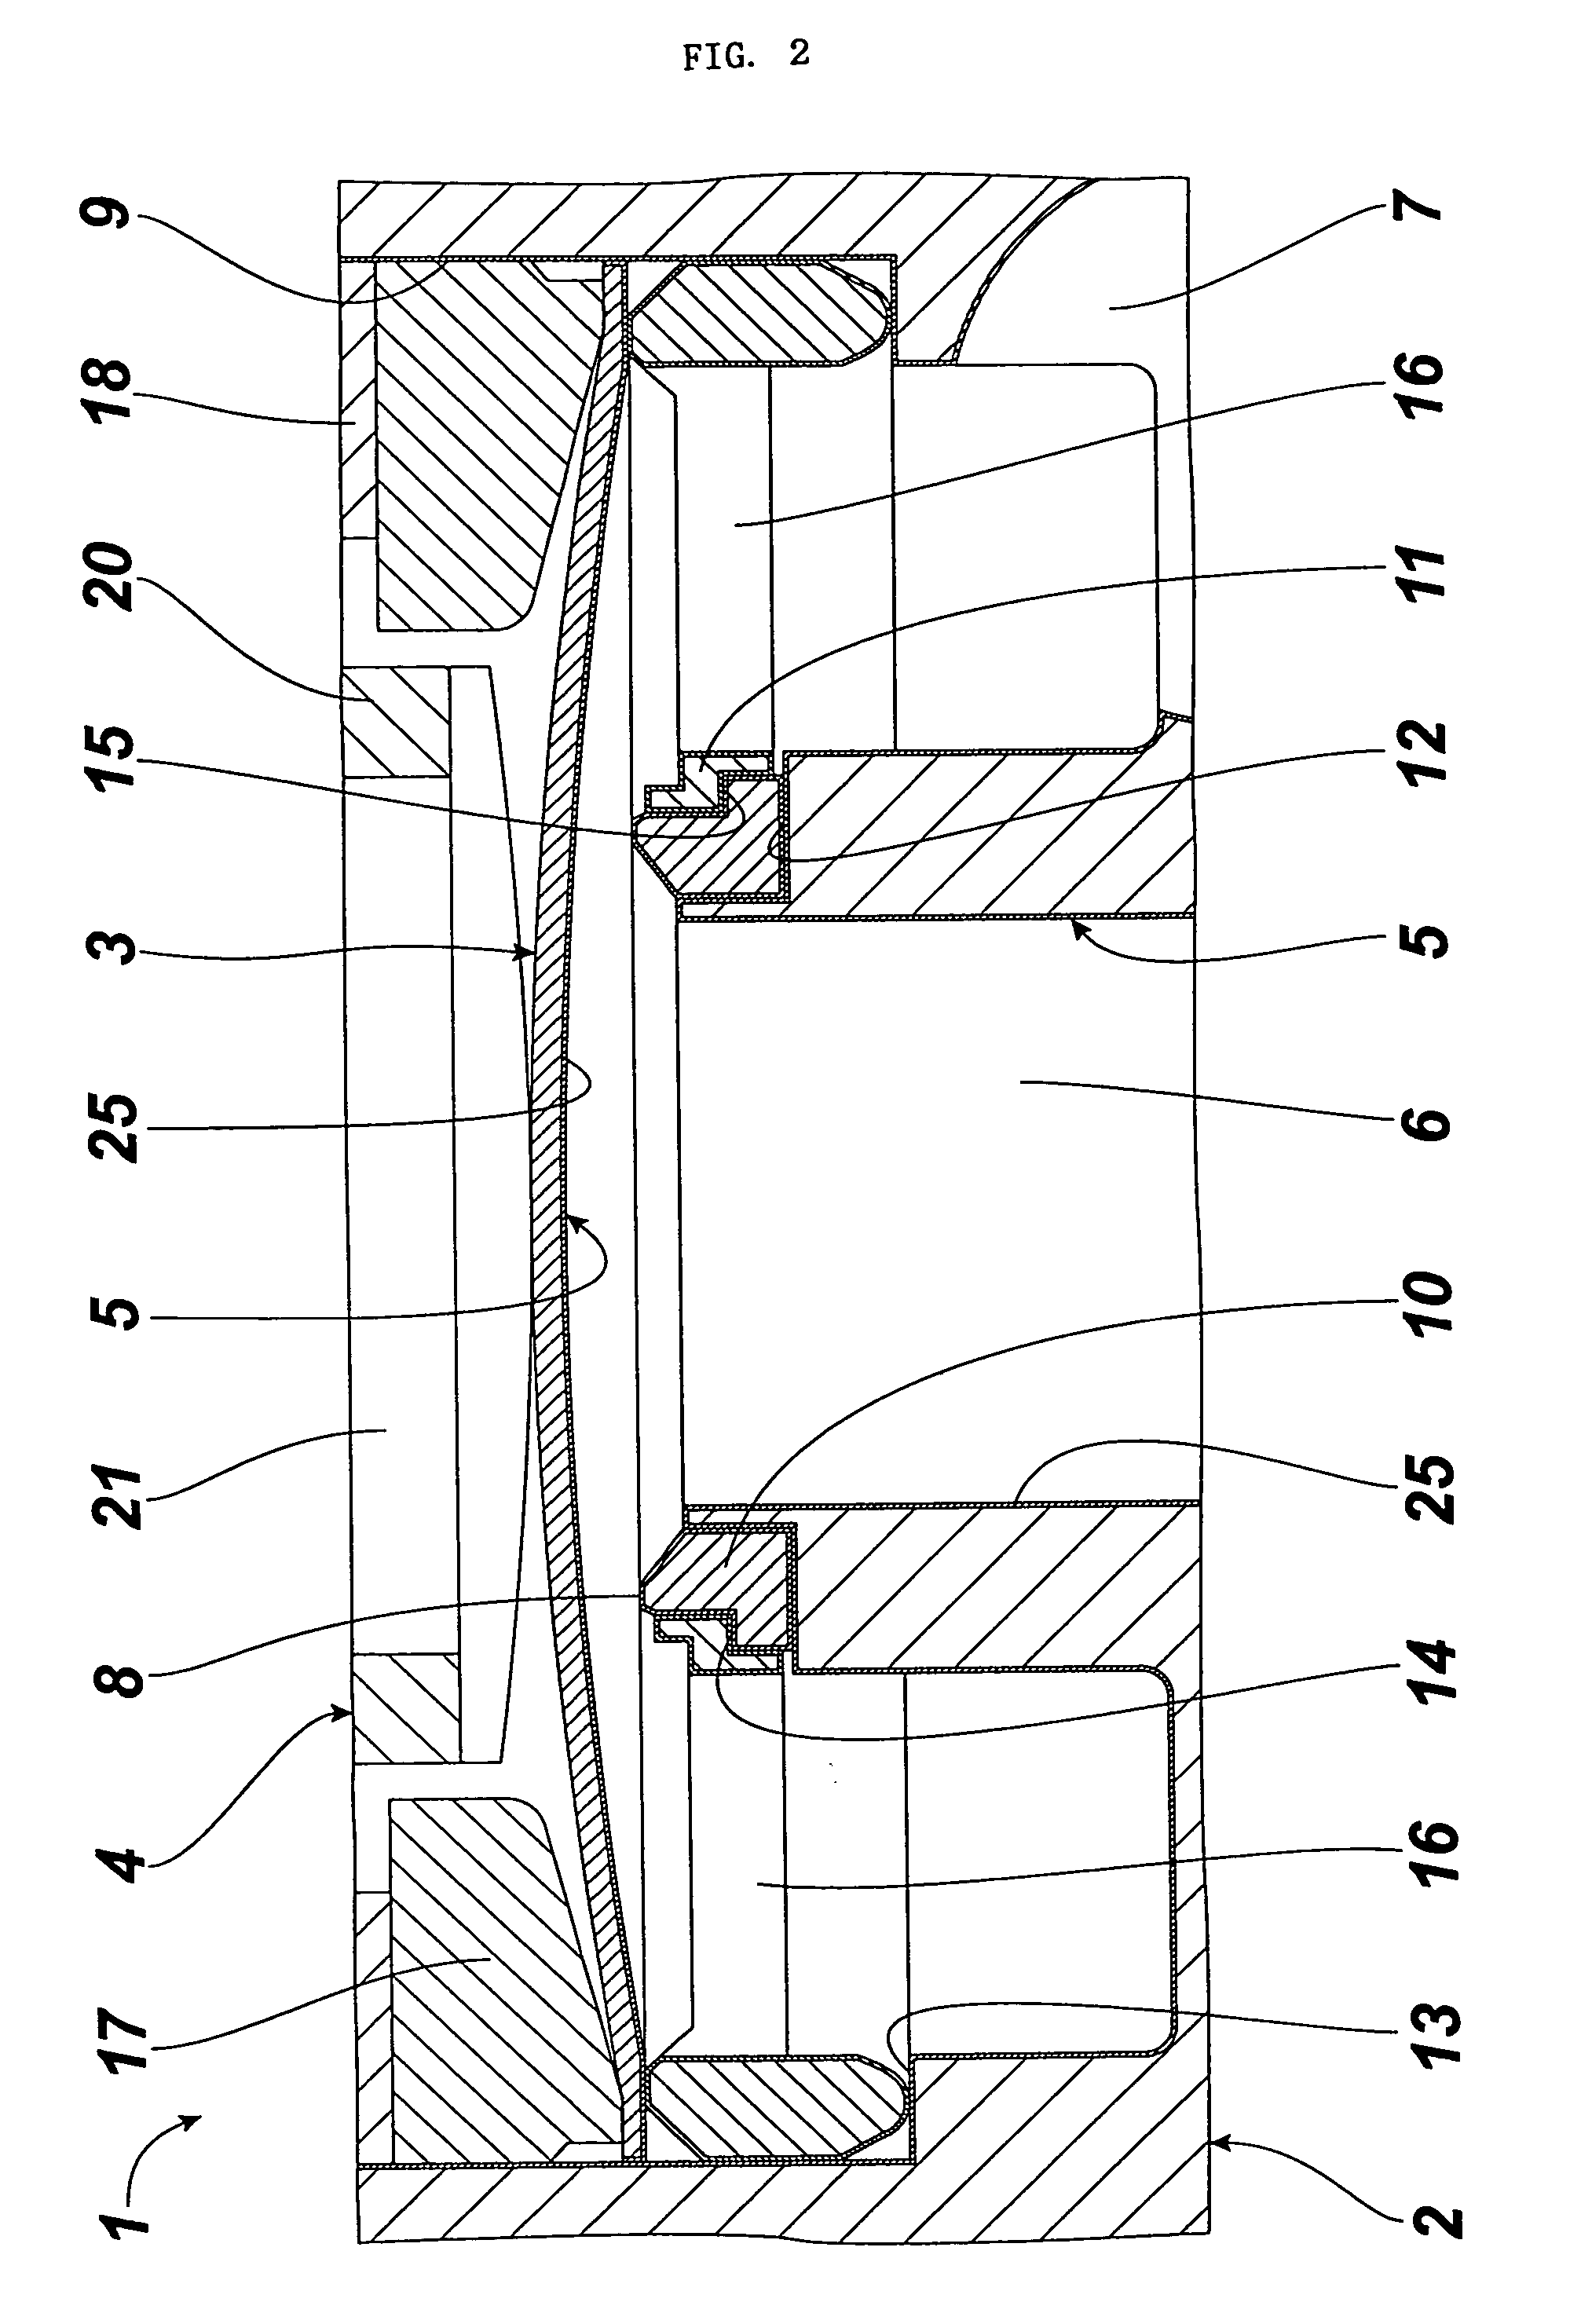 Diaphragm valve for the vacuum exhaustion system